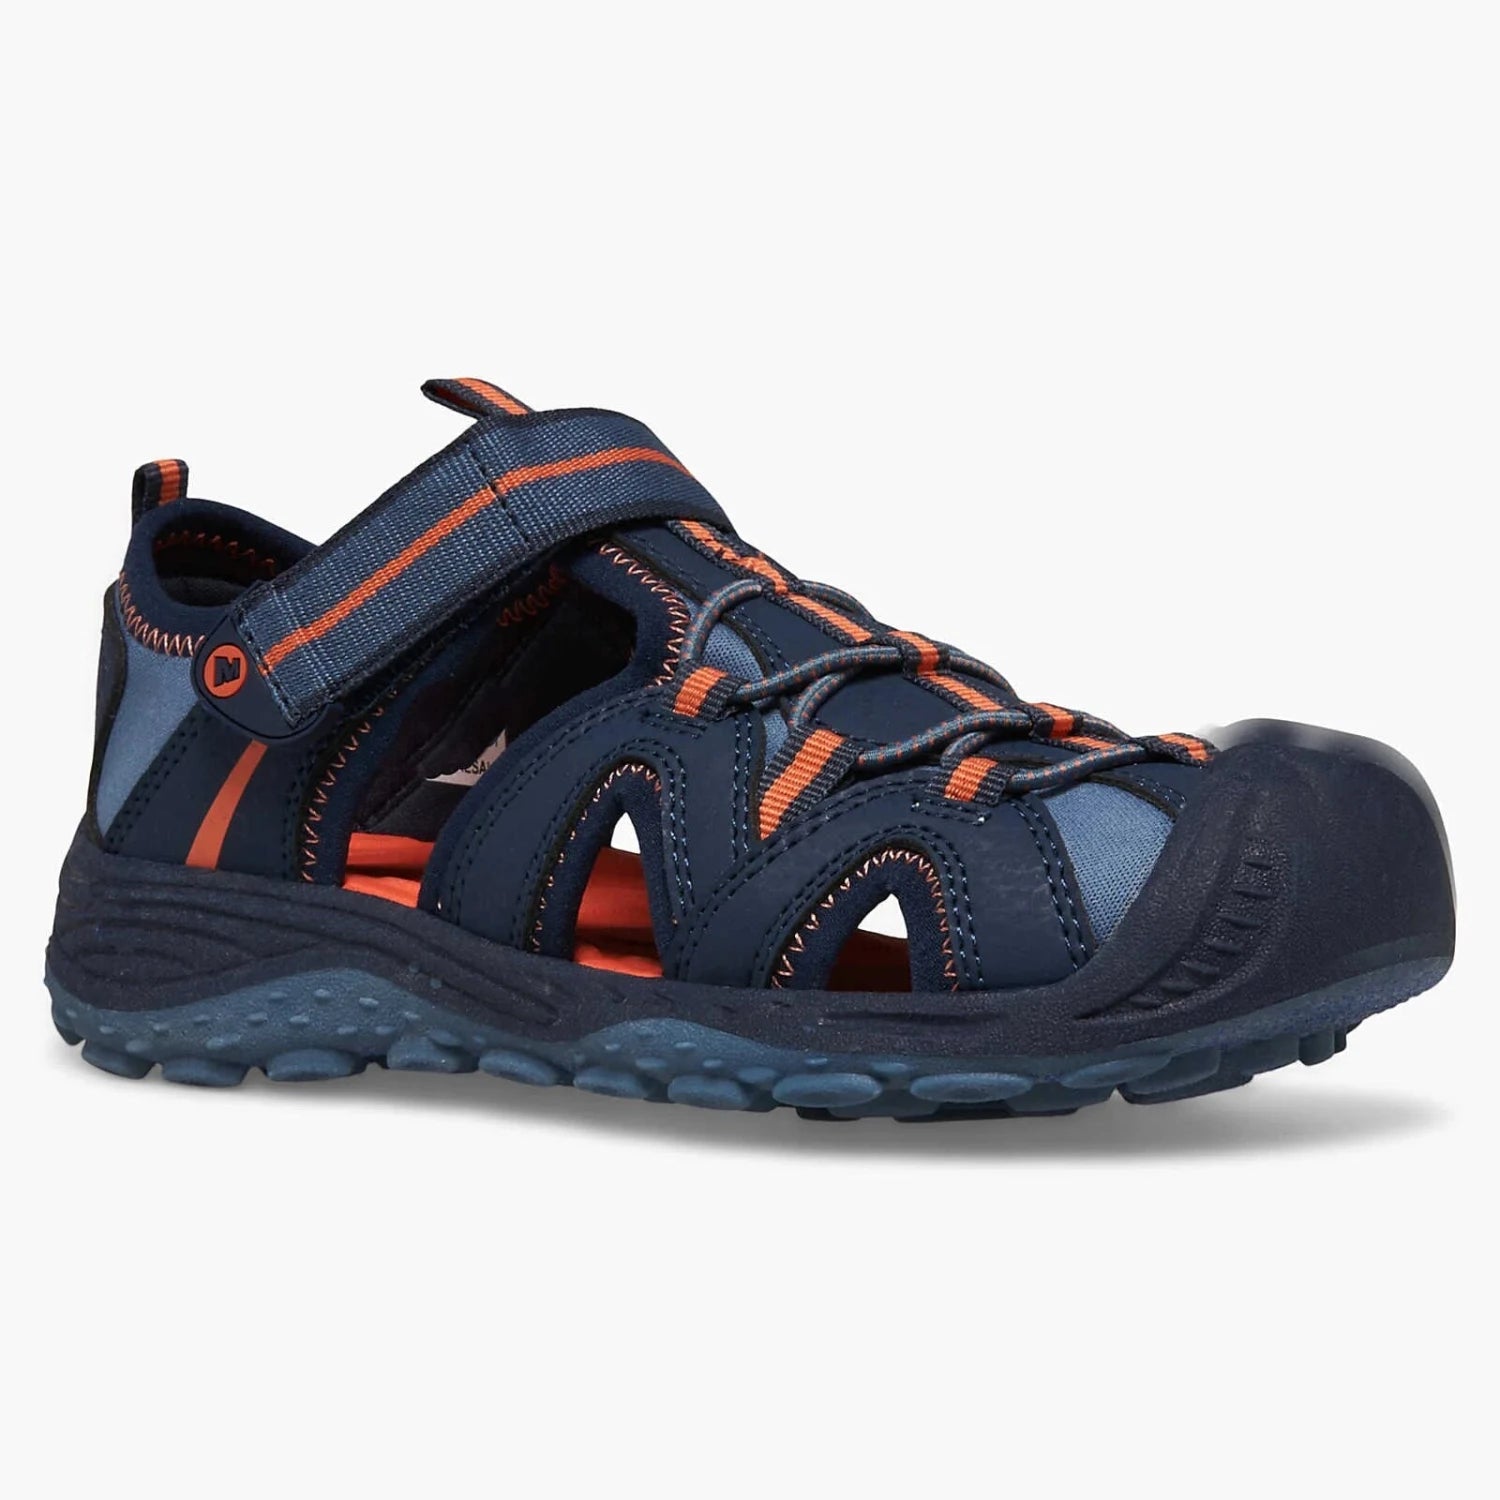 Merrell K's Hydro 2 Sandal, Navy Orange, front and side view 